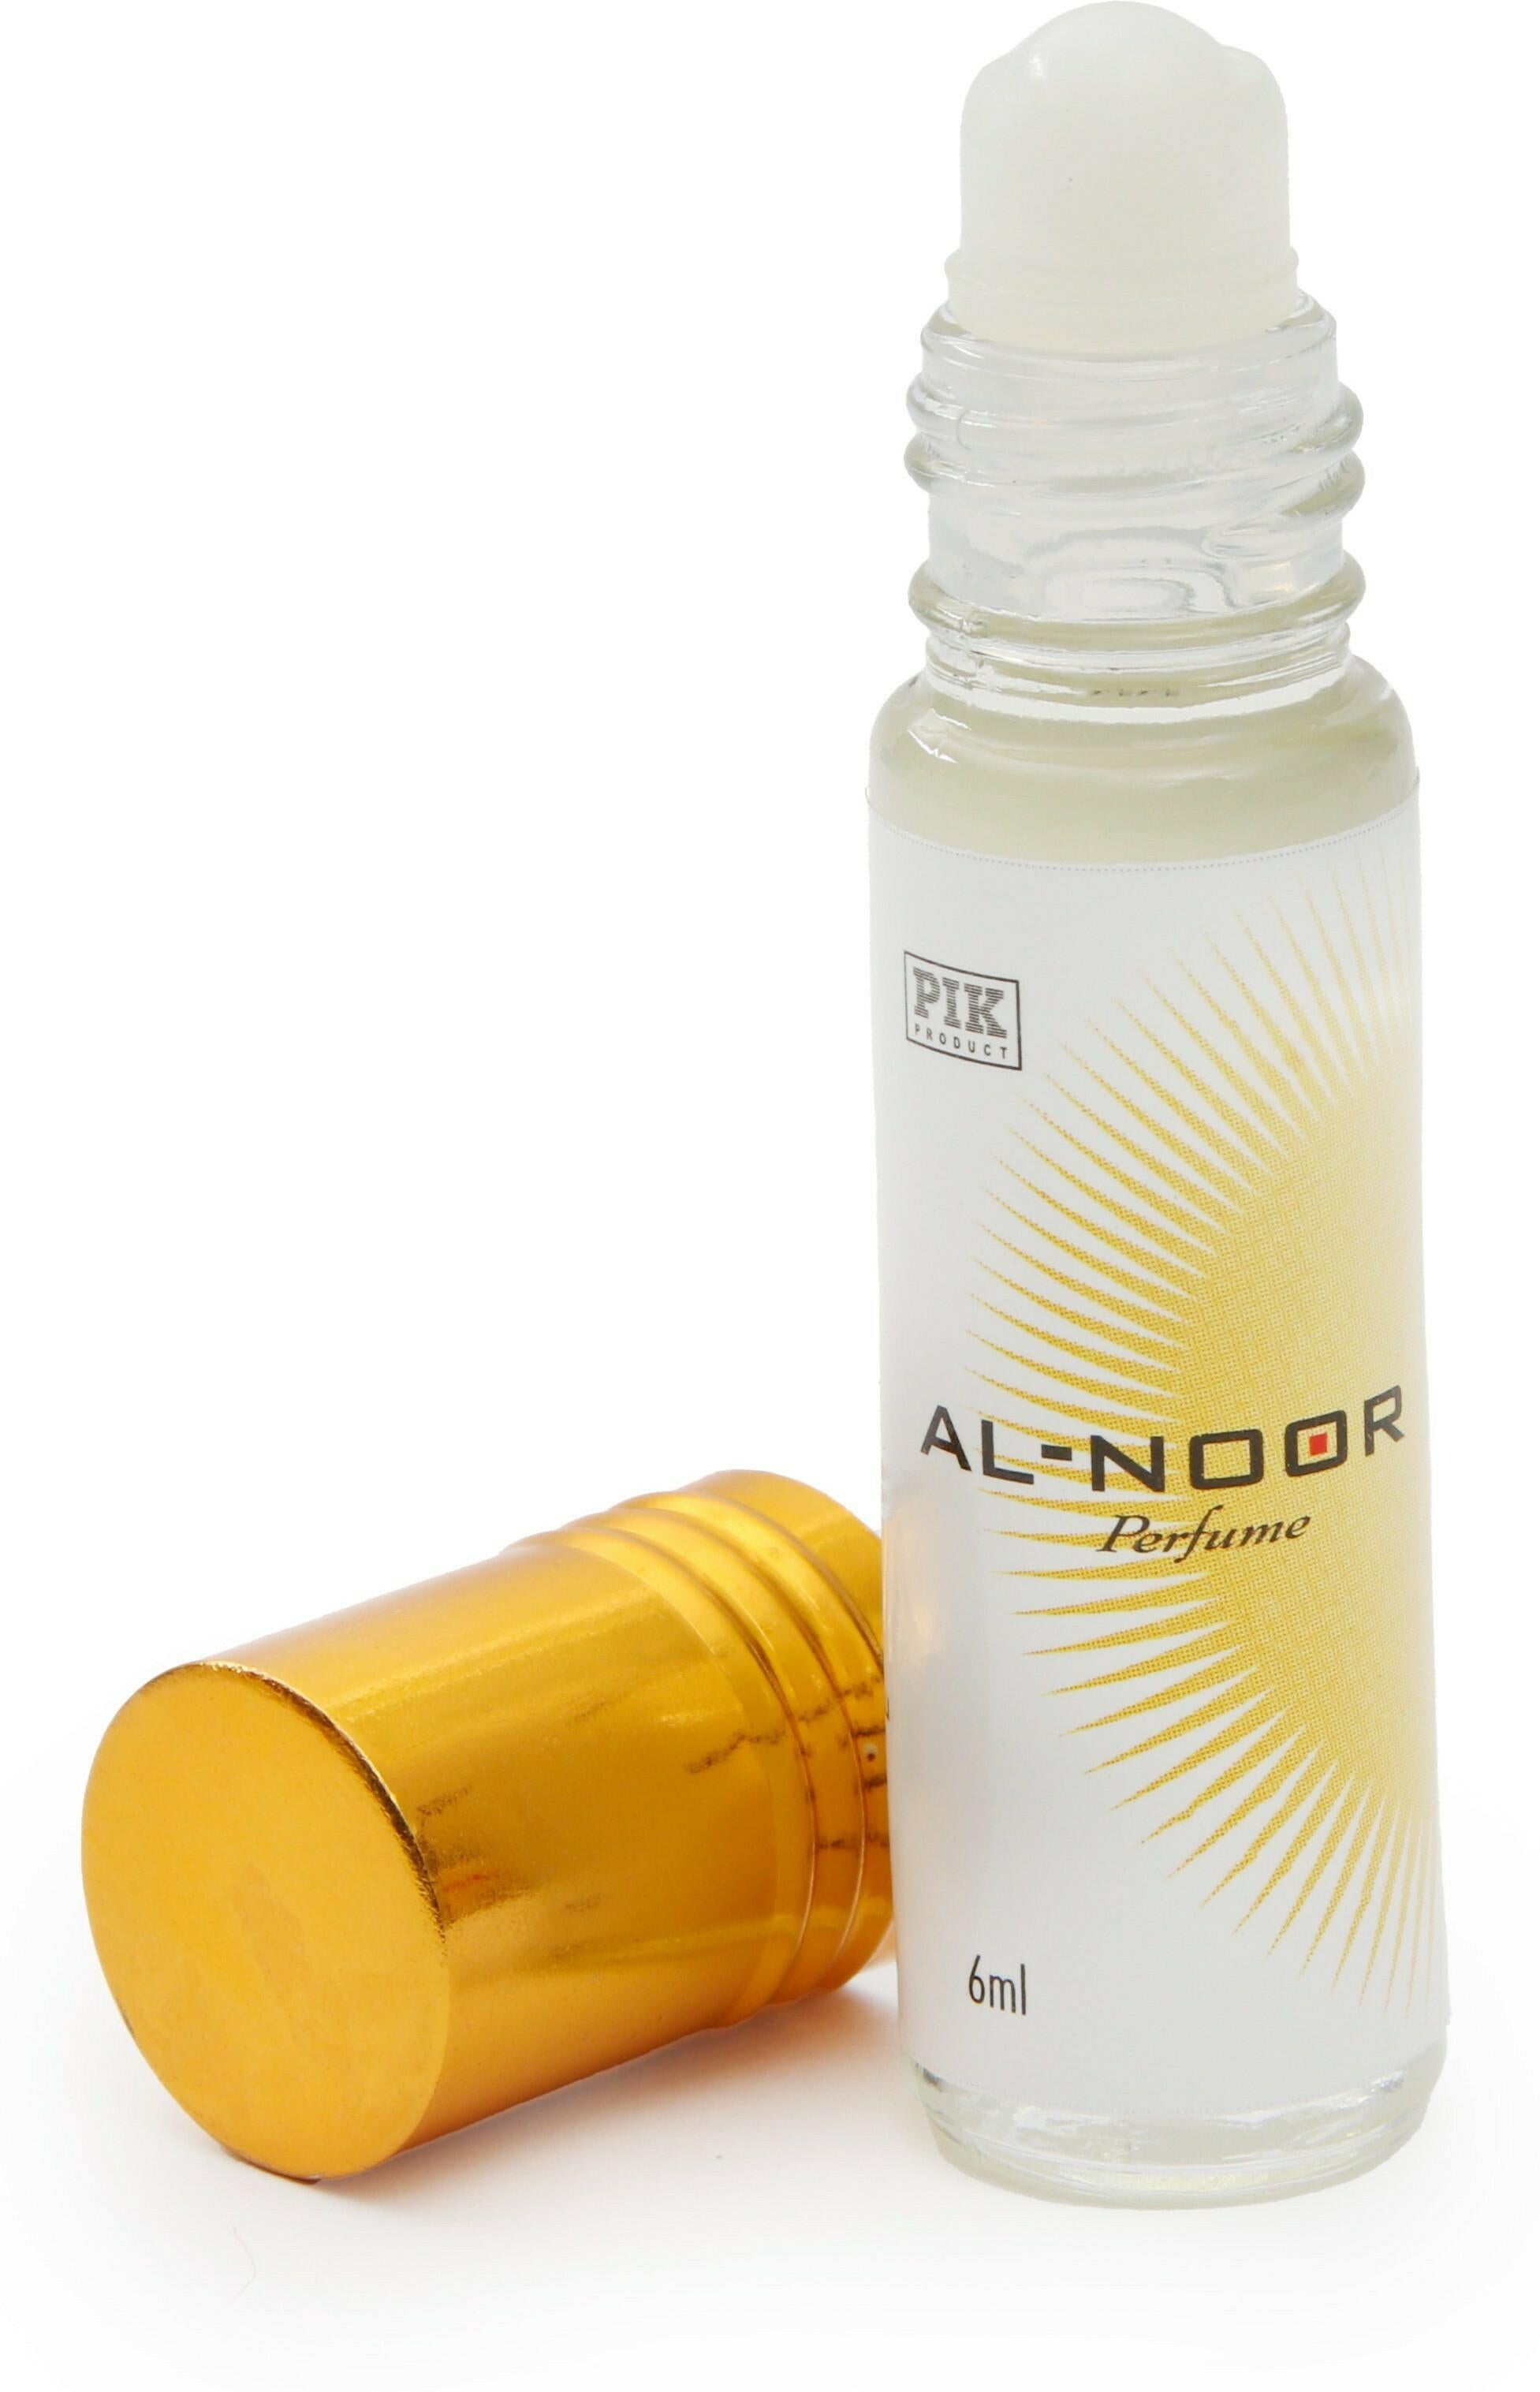 Al Noor Roll On Perfume Free From Alcohol Attarfragrance | luxury | beauty | captivating scent | long-lasting | elegance | alluring aroma | gender-neutral | olfactory masterpiece | Halabh.com